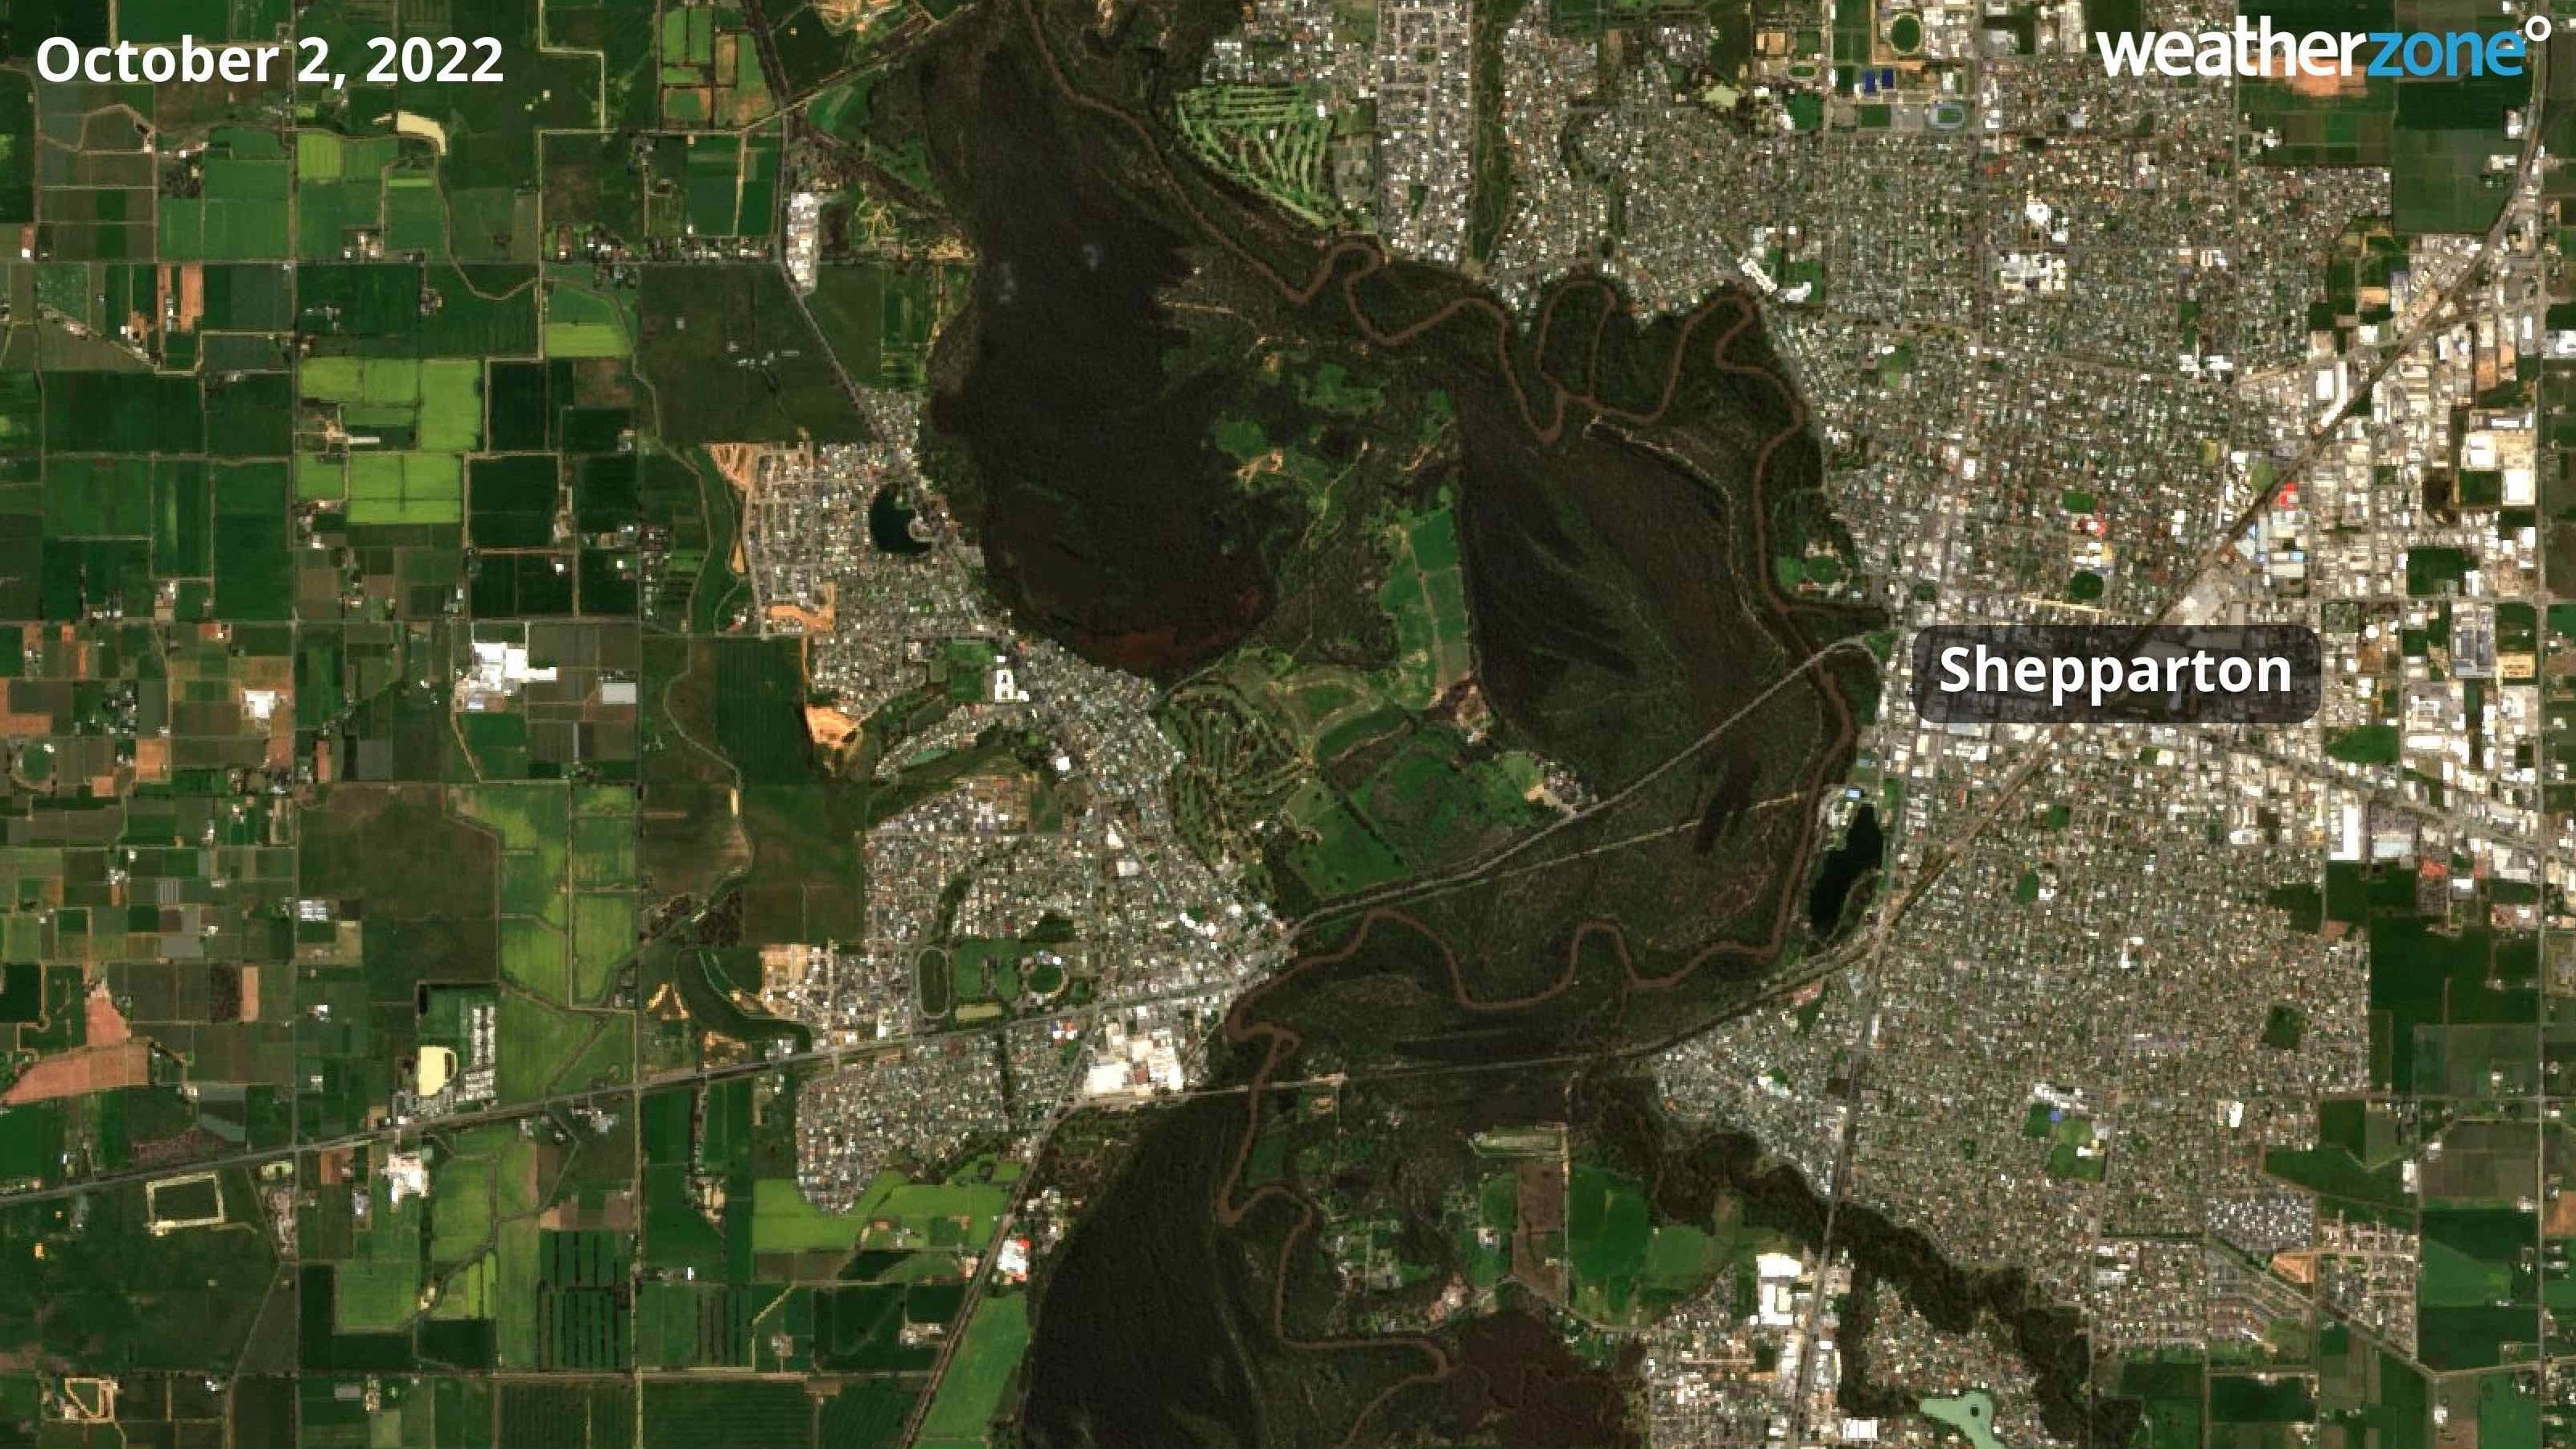 Satellite images showing the Goulburn River at Shepparton reveals how much the river spilled over the past two weeks. This image was taken October 2, 2022. 